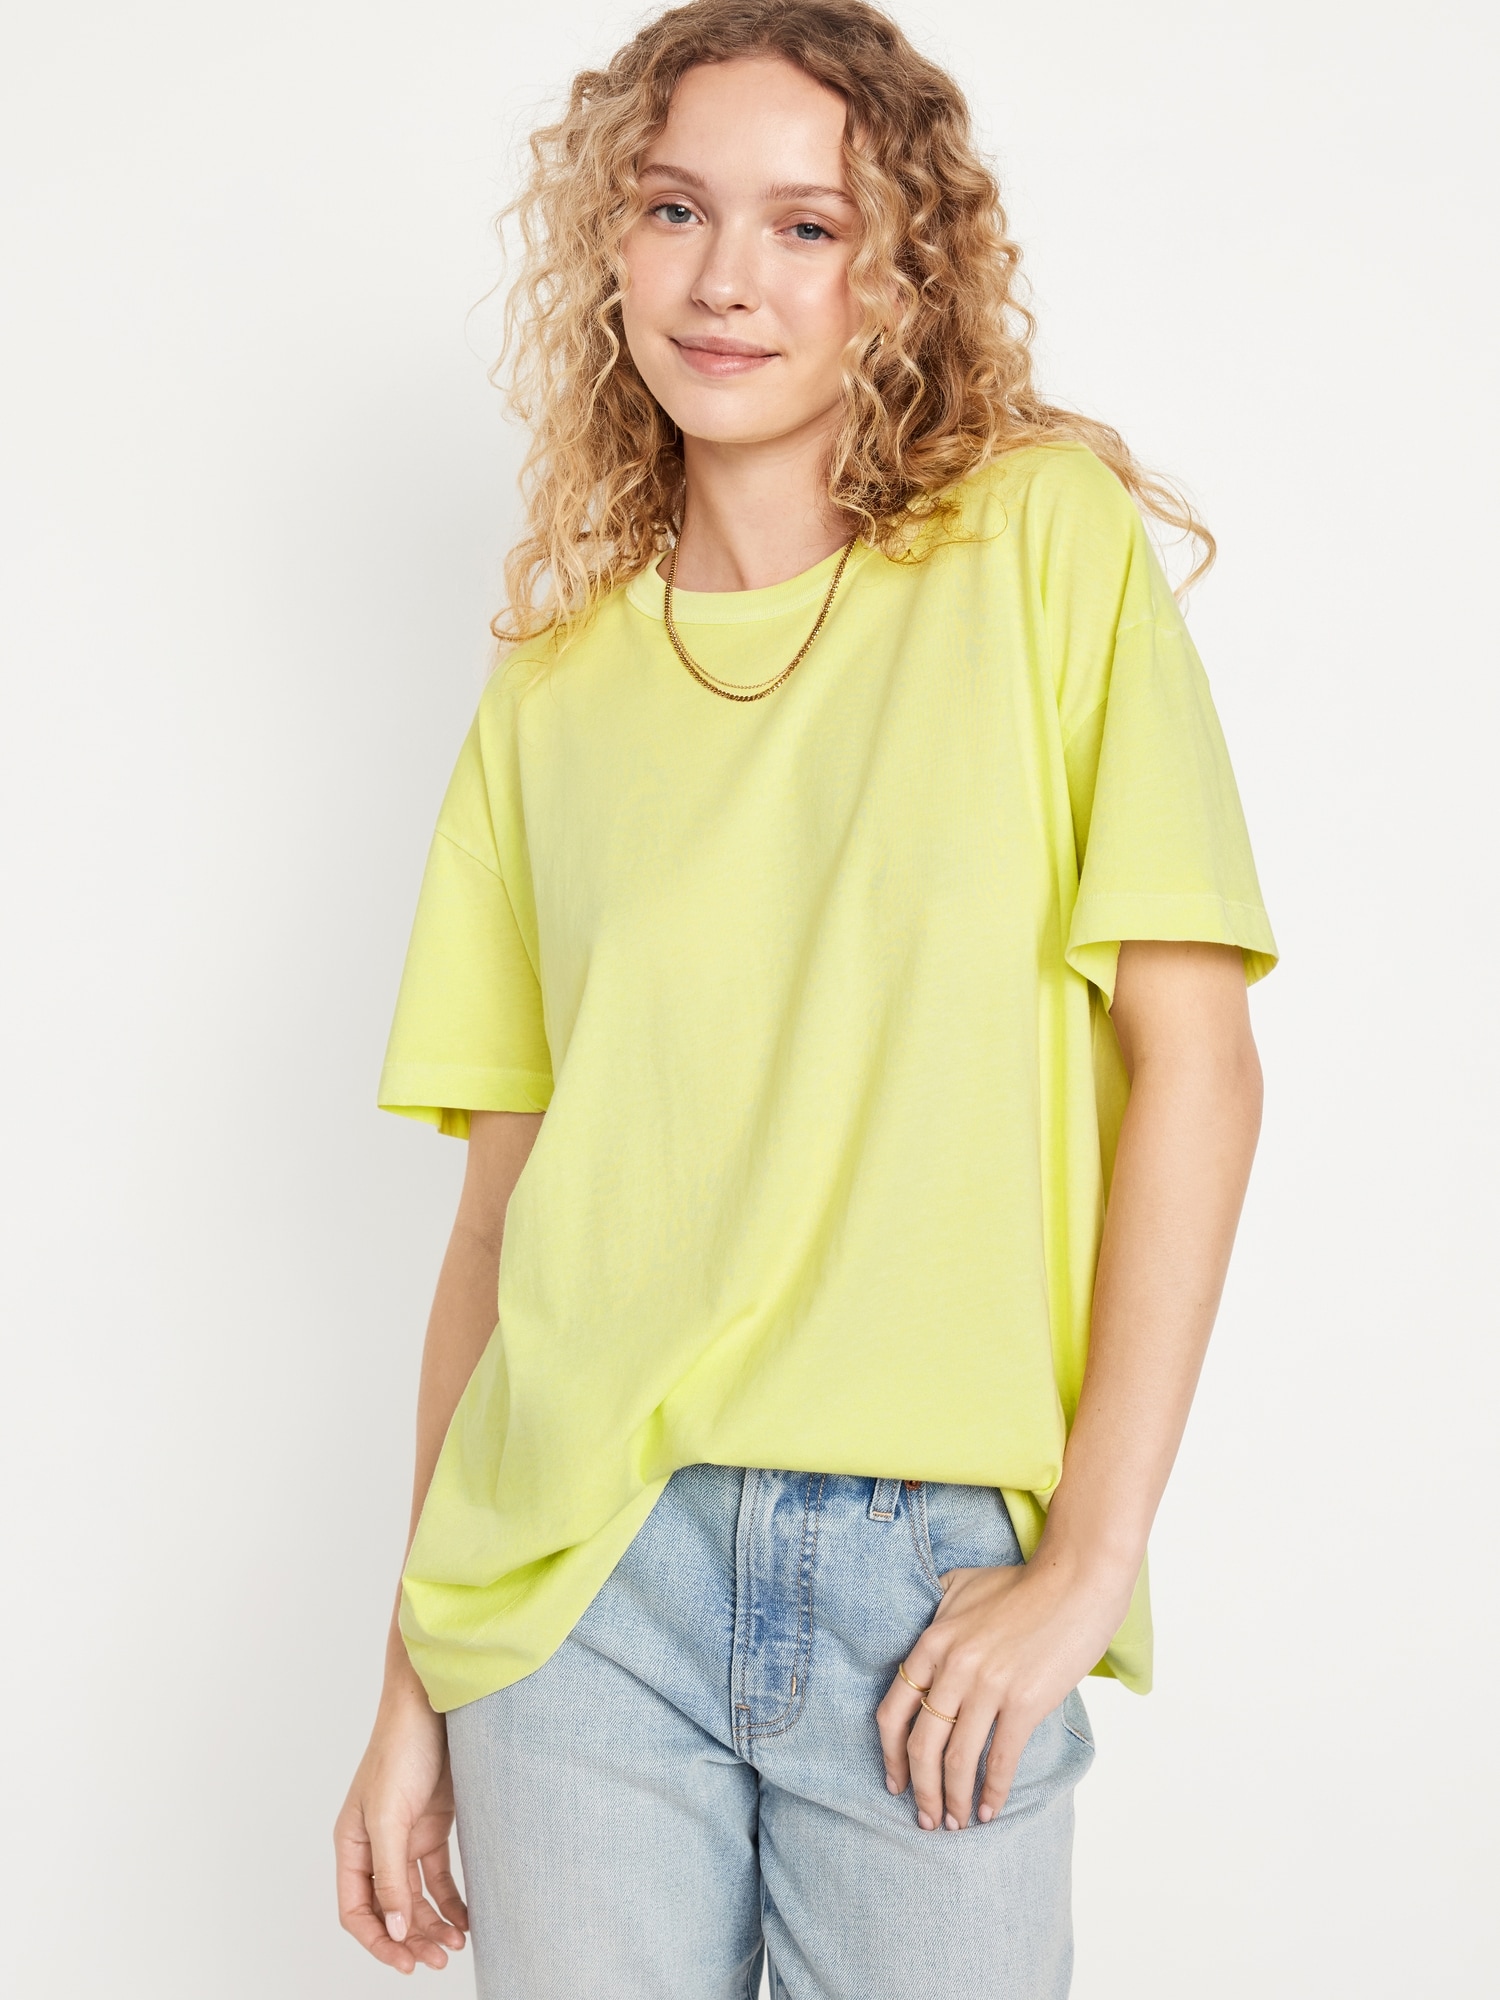 LIYOHON Oversized T Shirts for Women Tunic Tops to Wear with